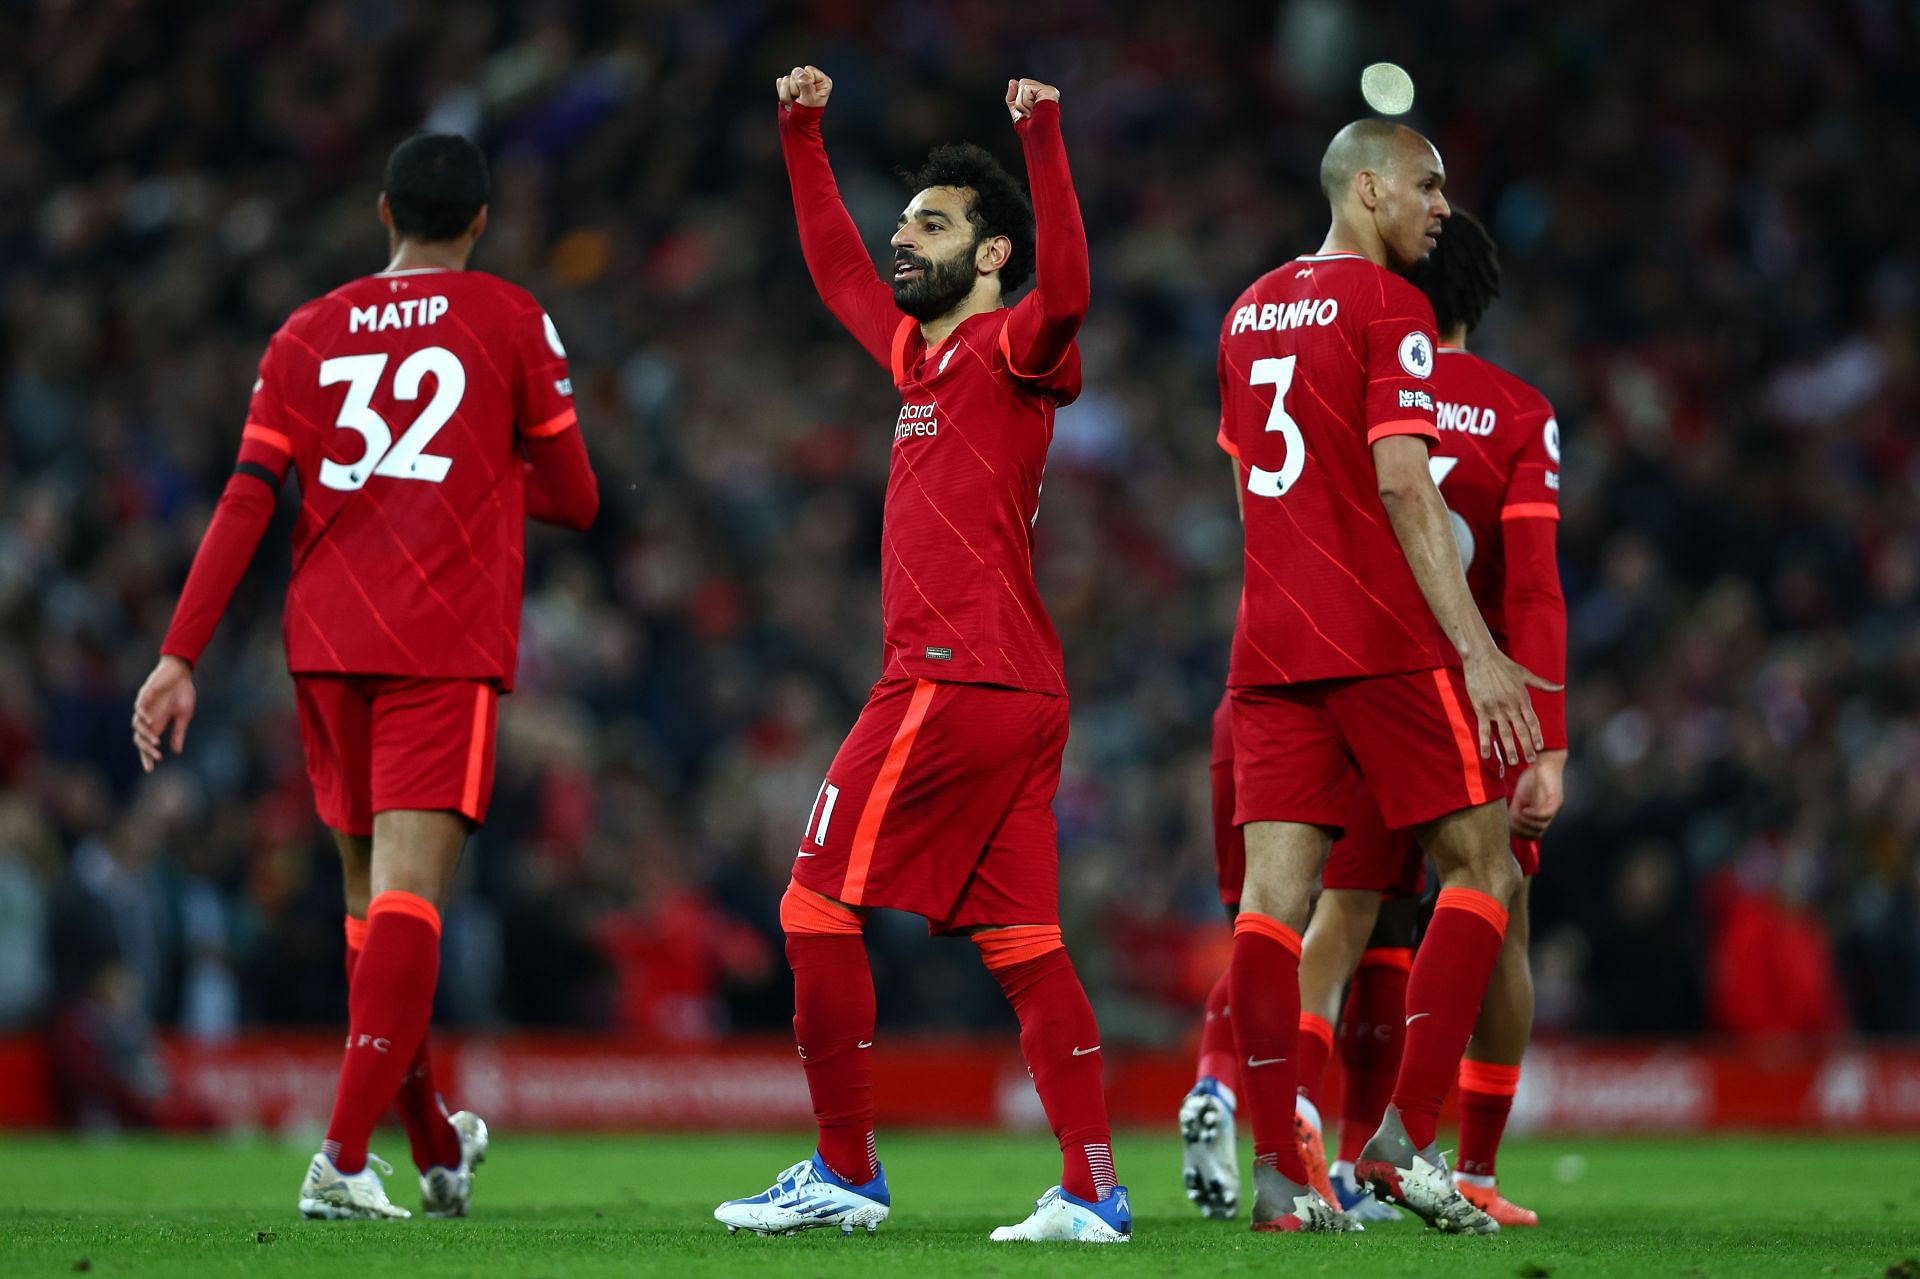 The Reds are on a quest for a quadruple this season